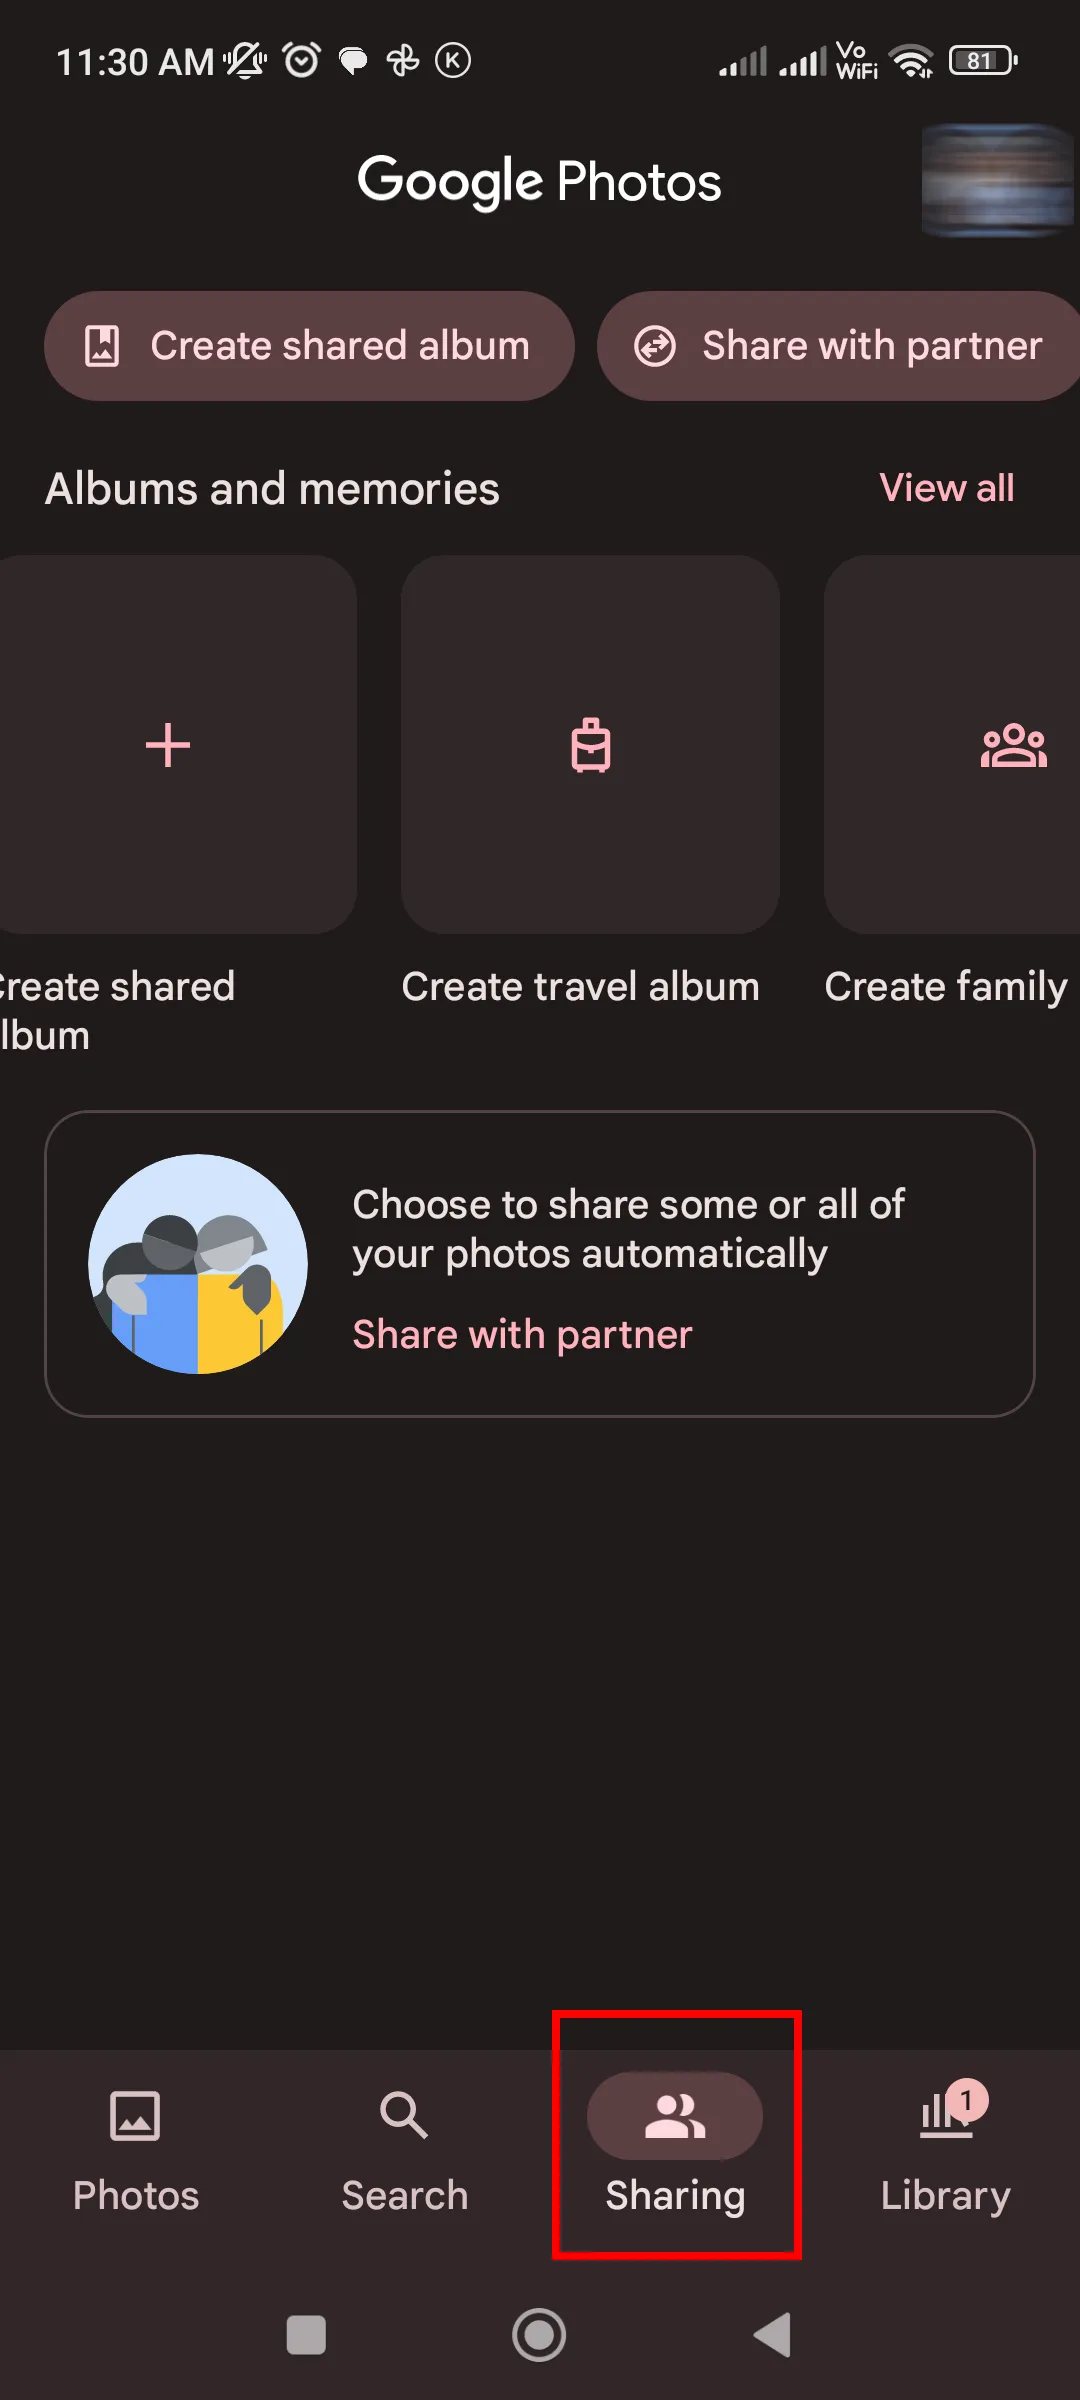 Access the Shared Album